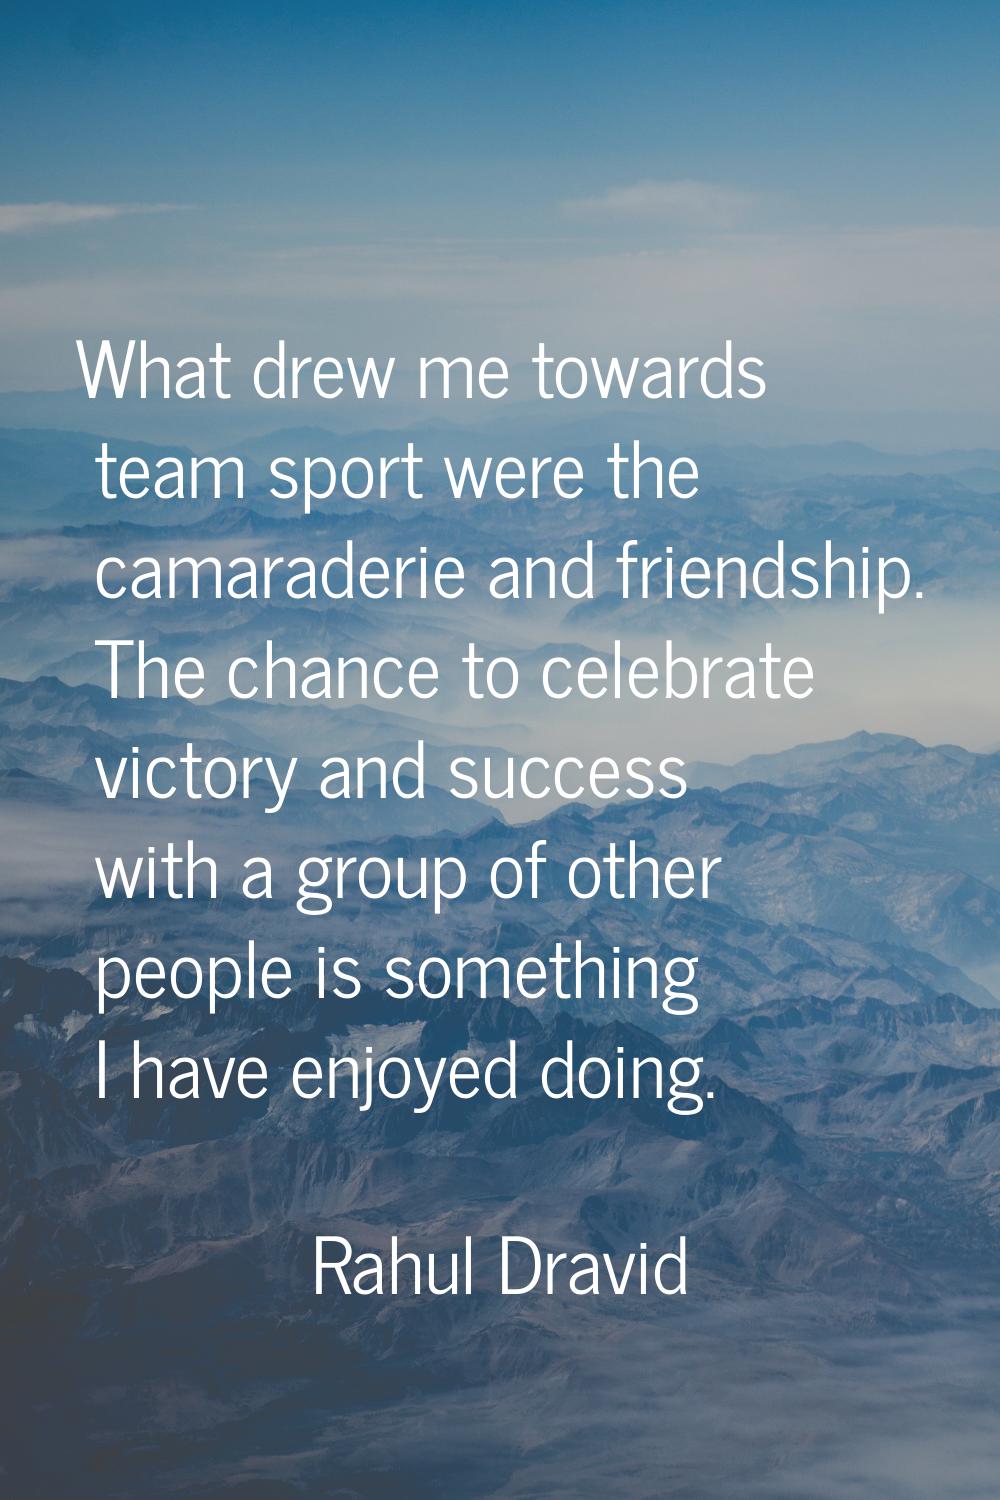 What drew me towards team sport were the camaraderie and friendship. The chance to celebrate victor